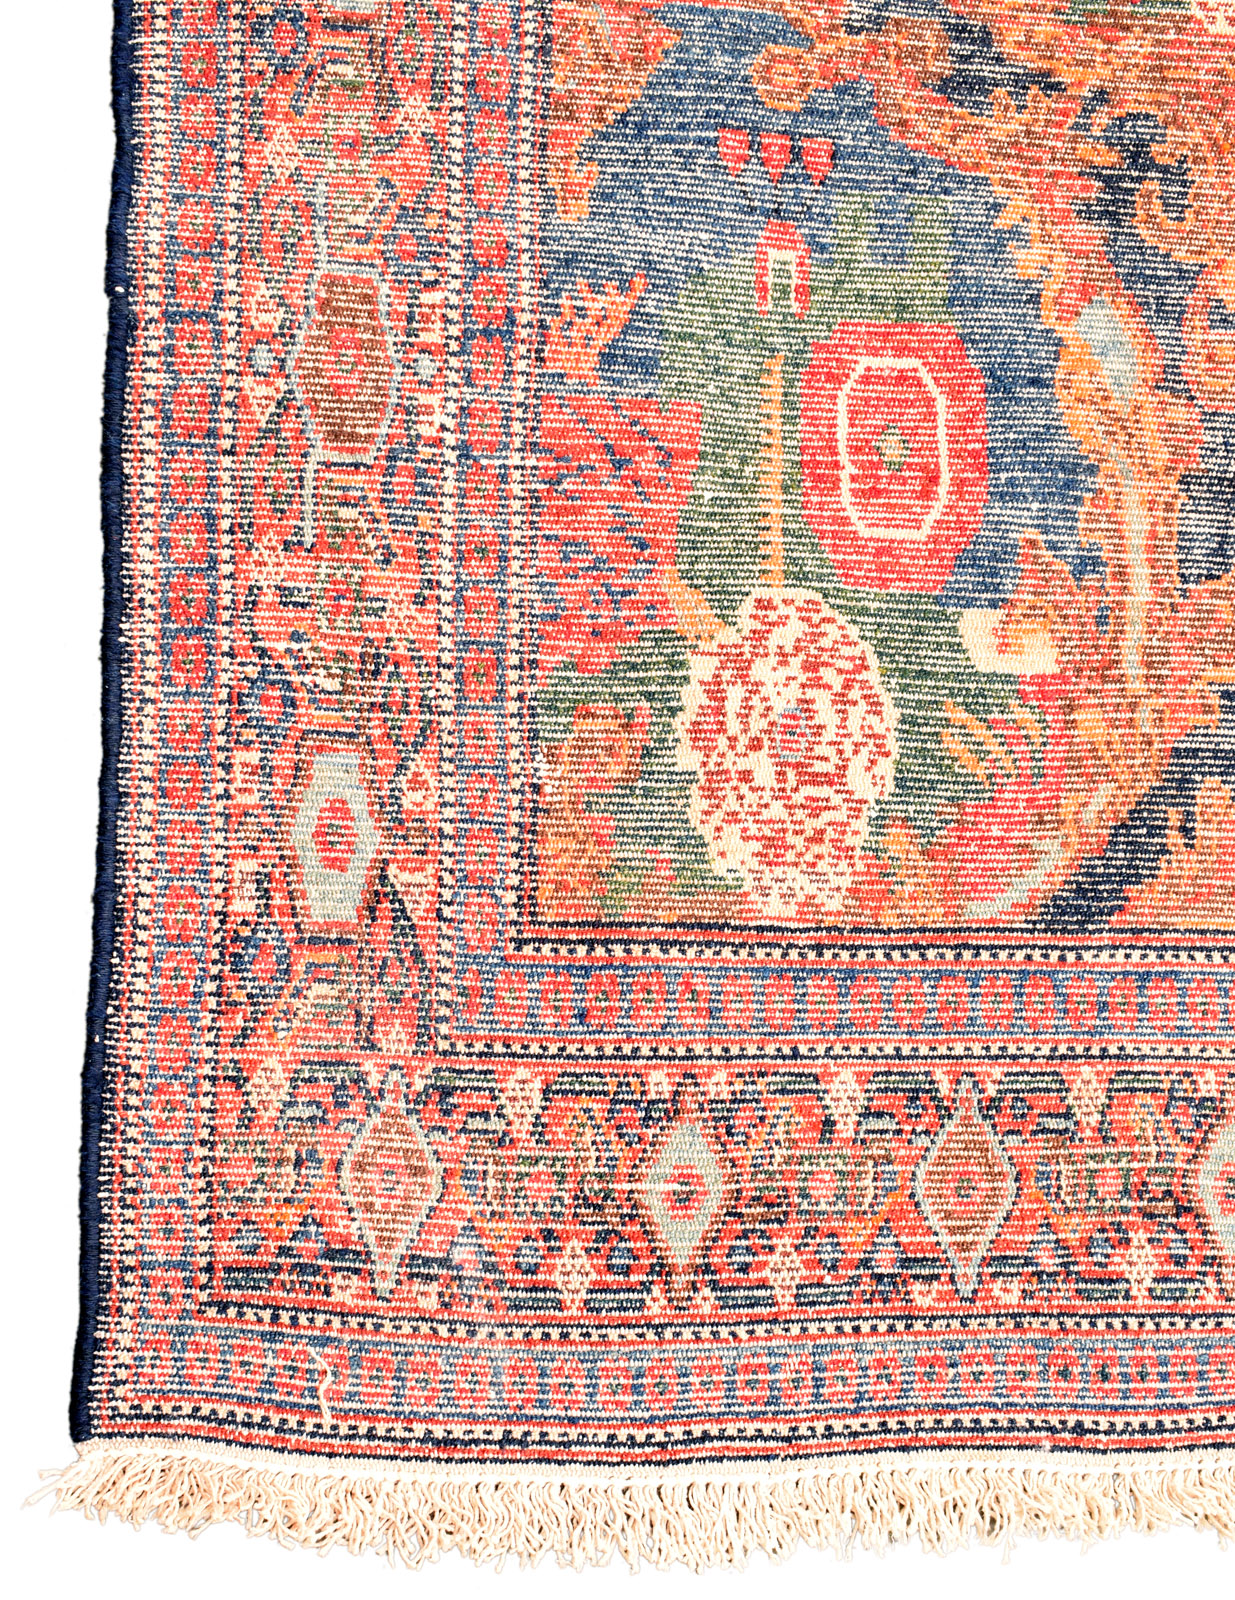 SENNEH WITH ROSE PATTERN - Image 5 of 6